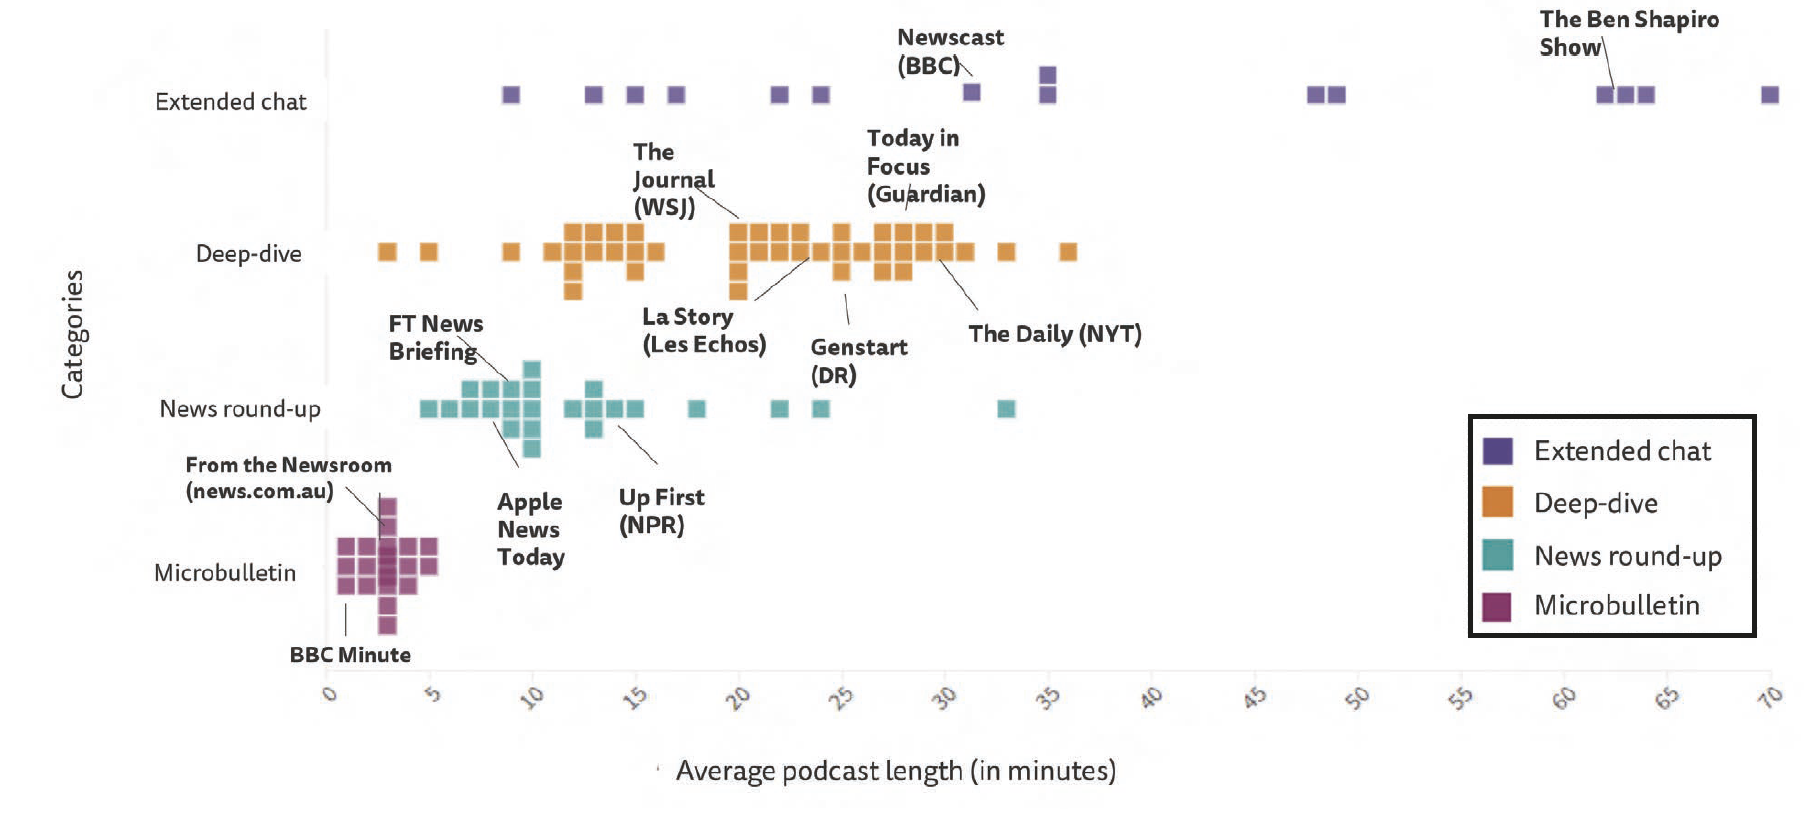 news podcasts length by category